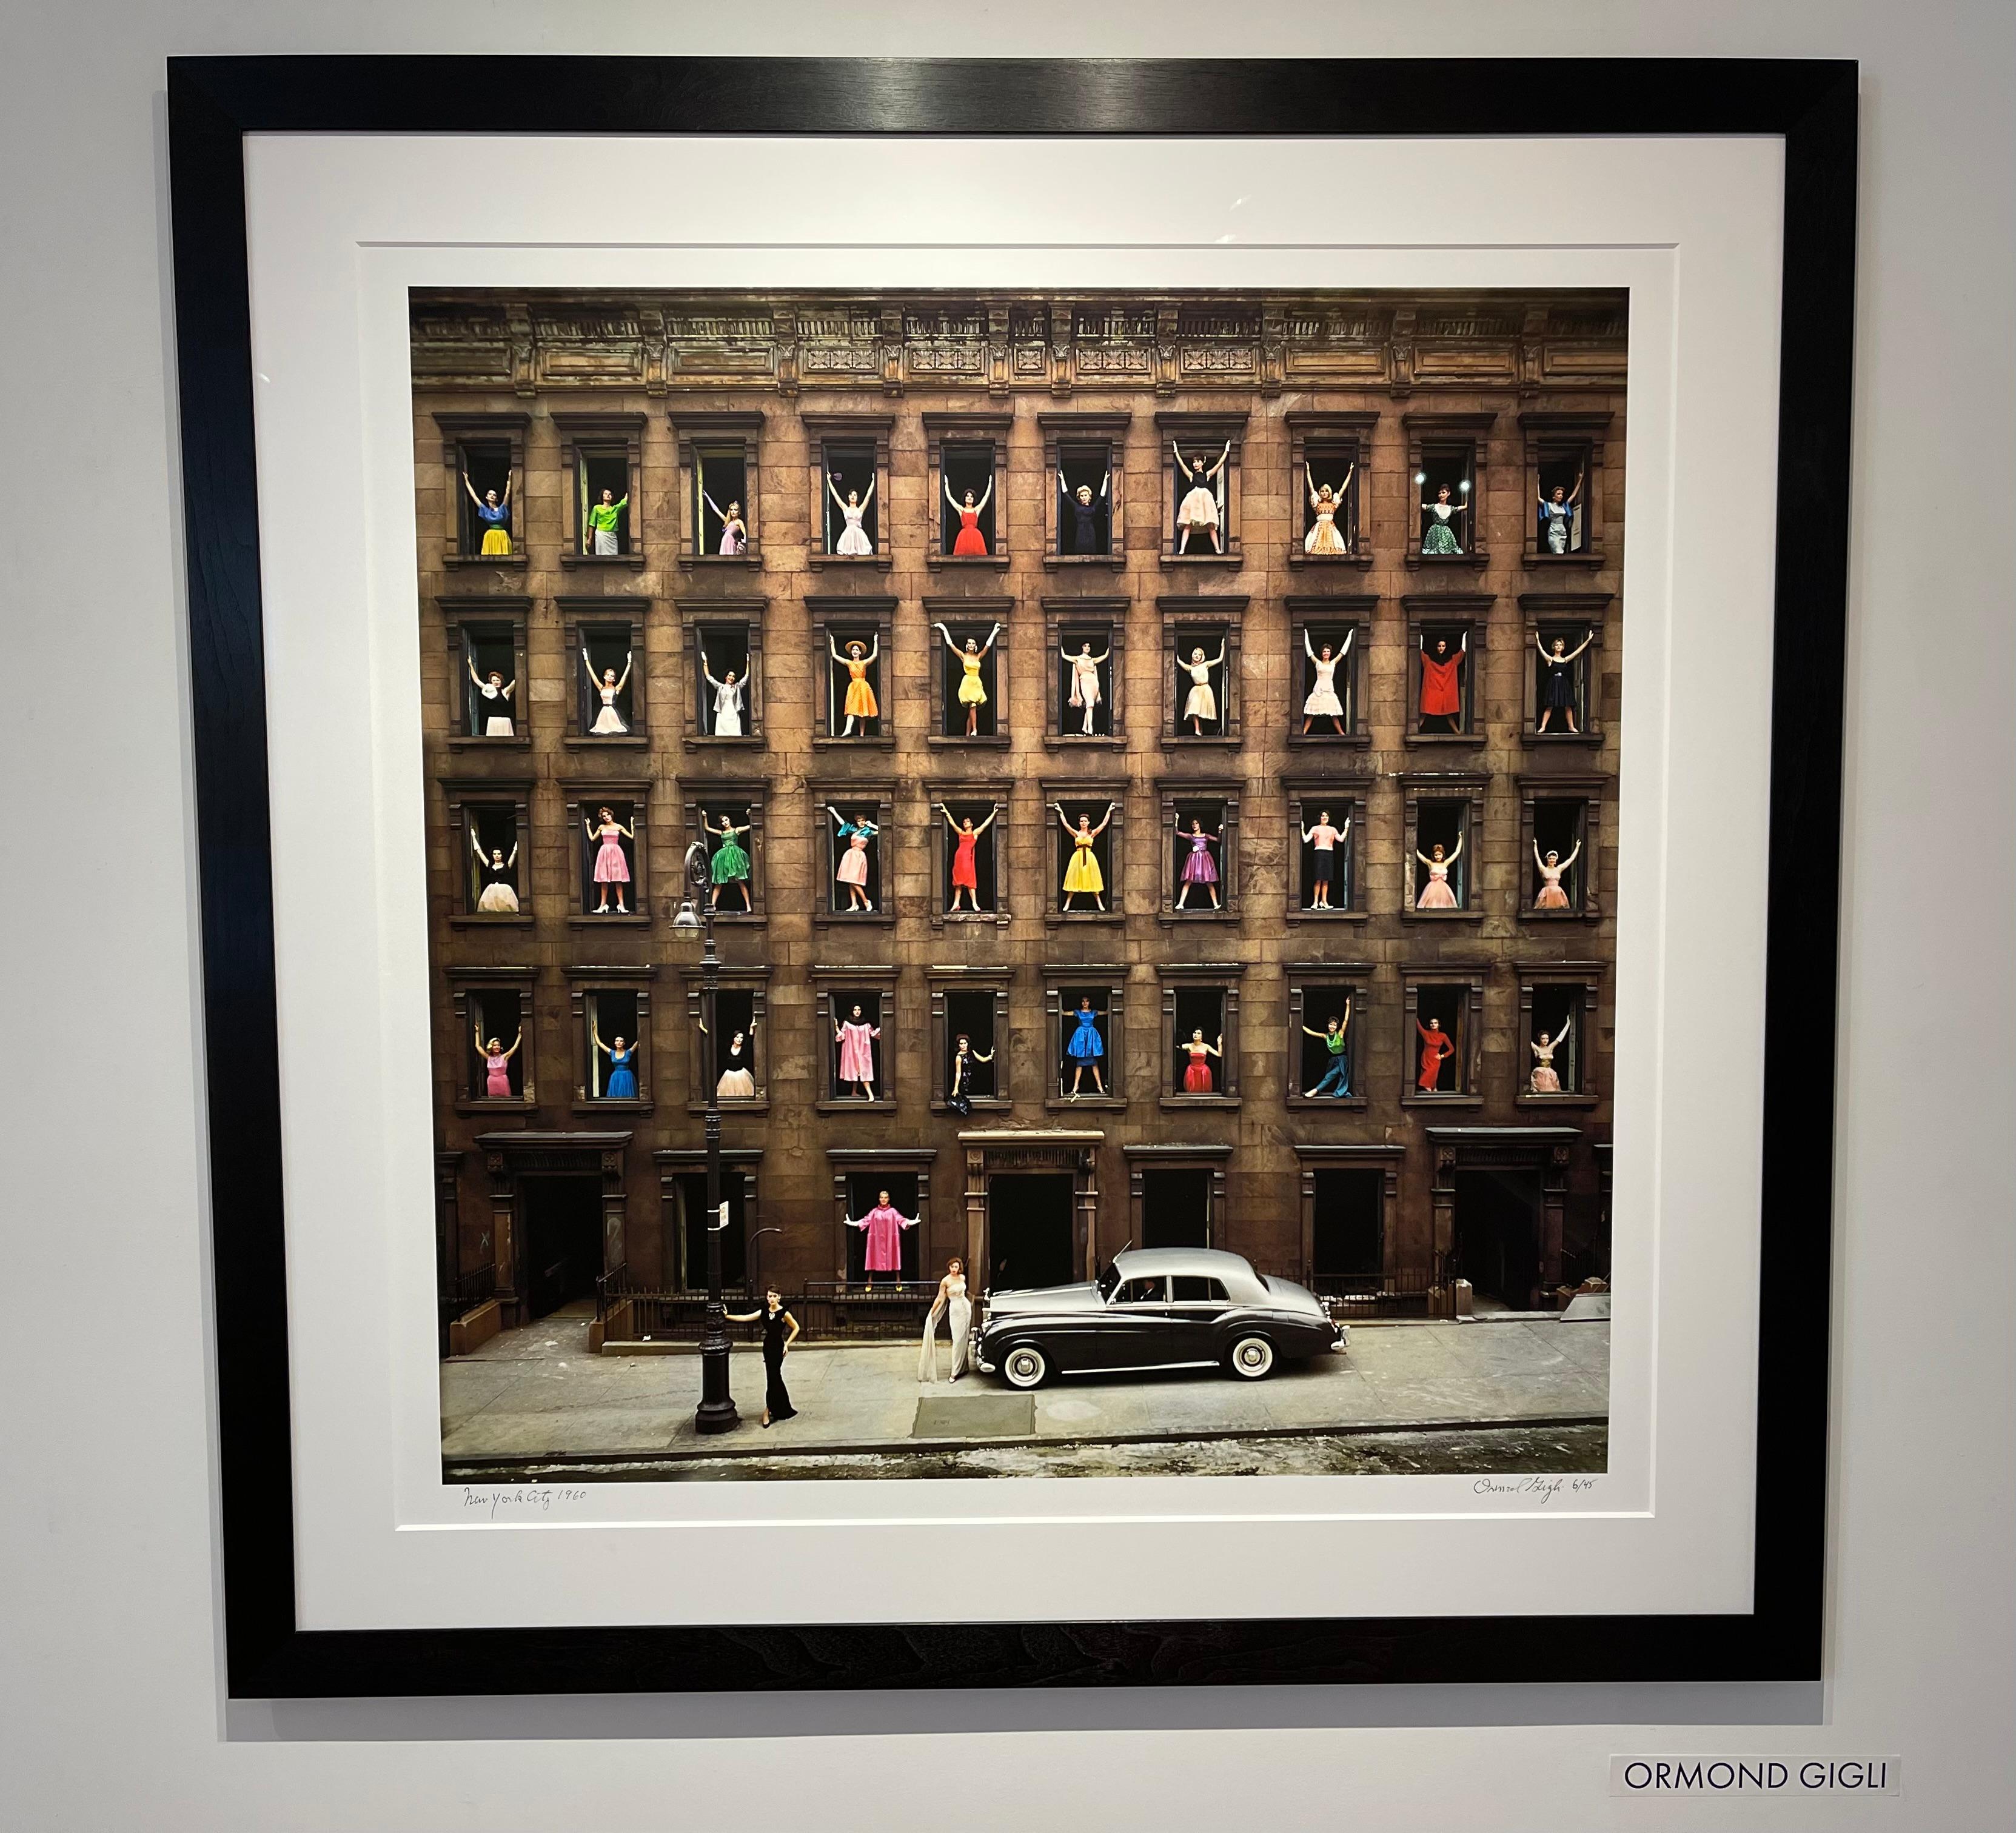 Girls in the Windows - Photograph by Ormond Gigli